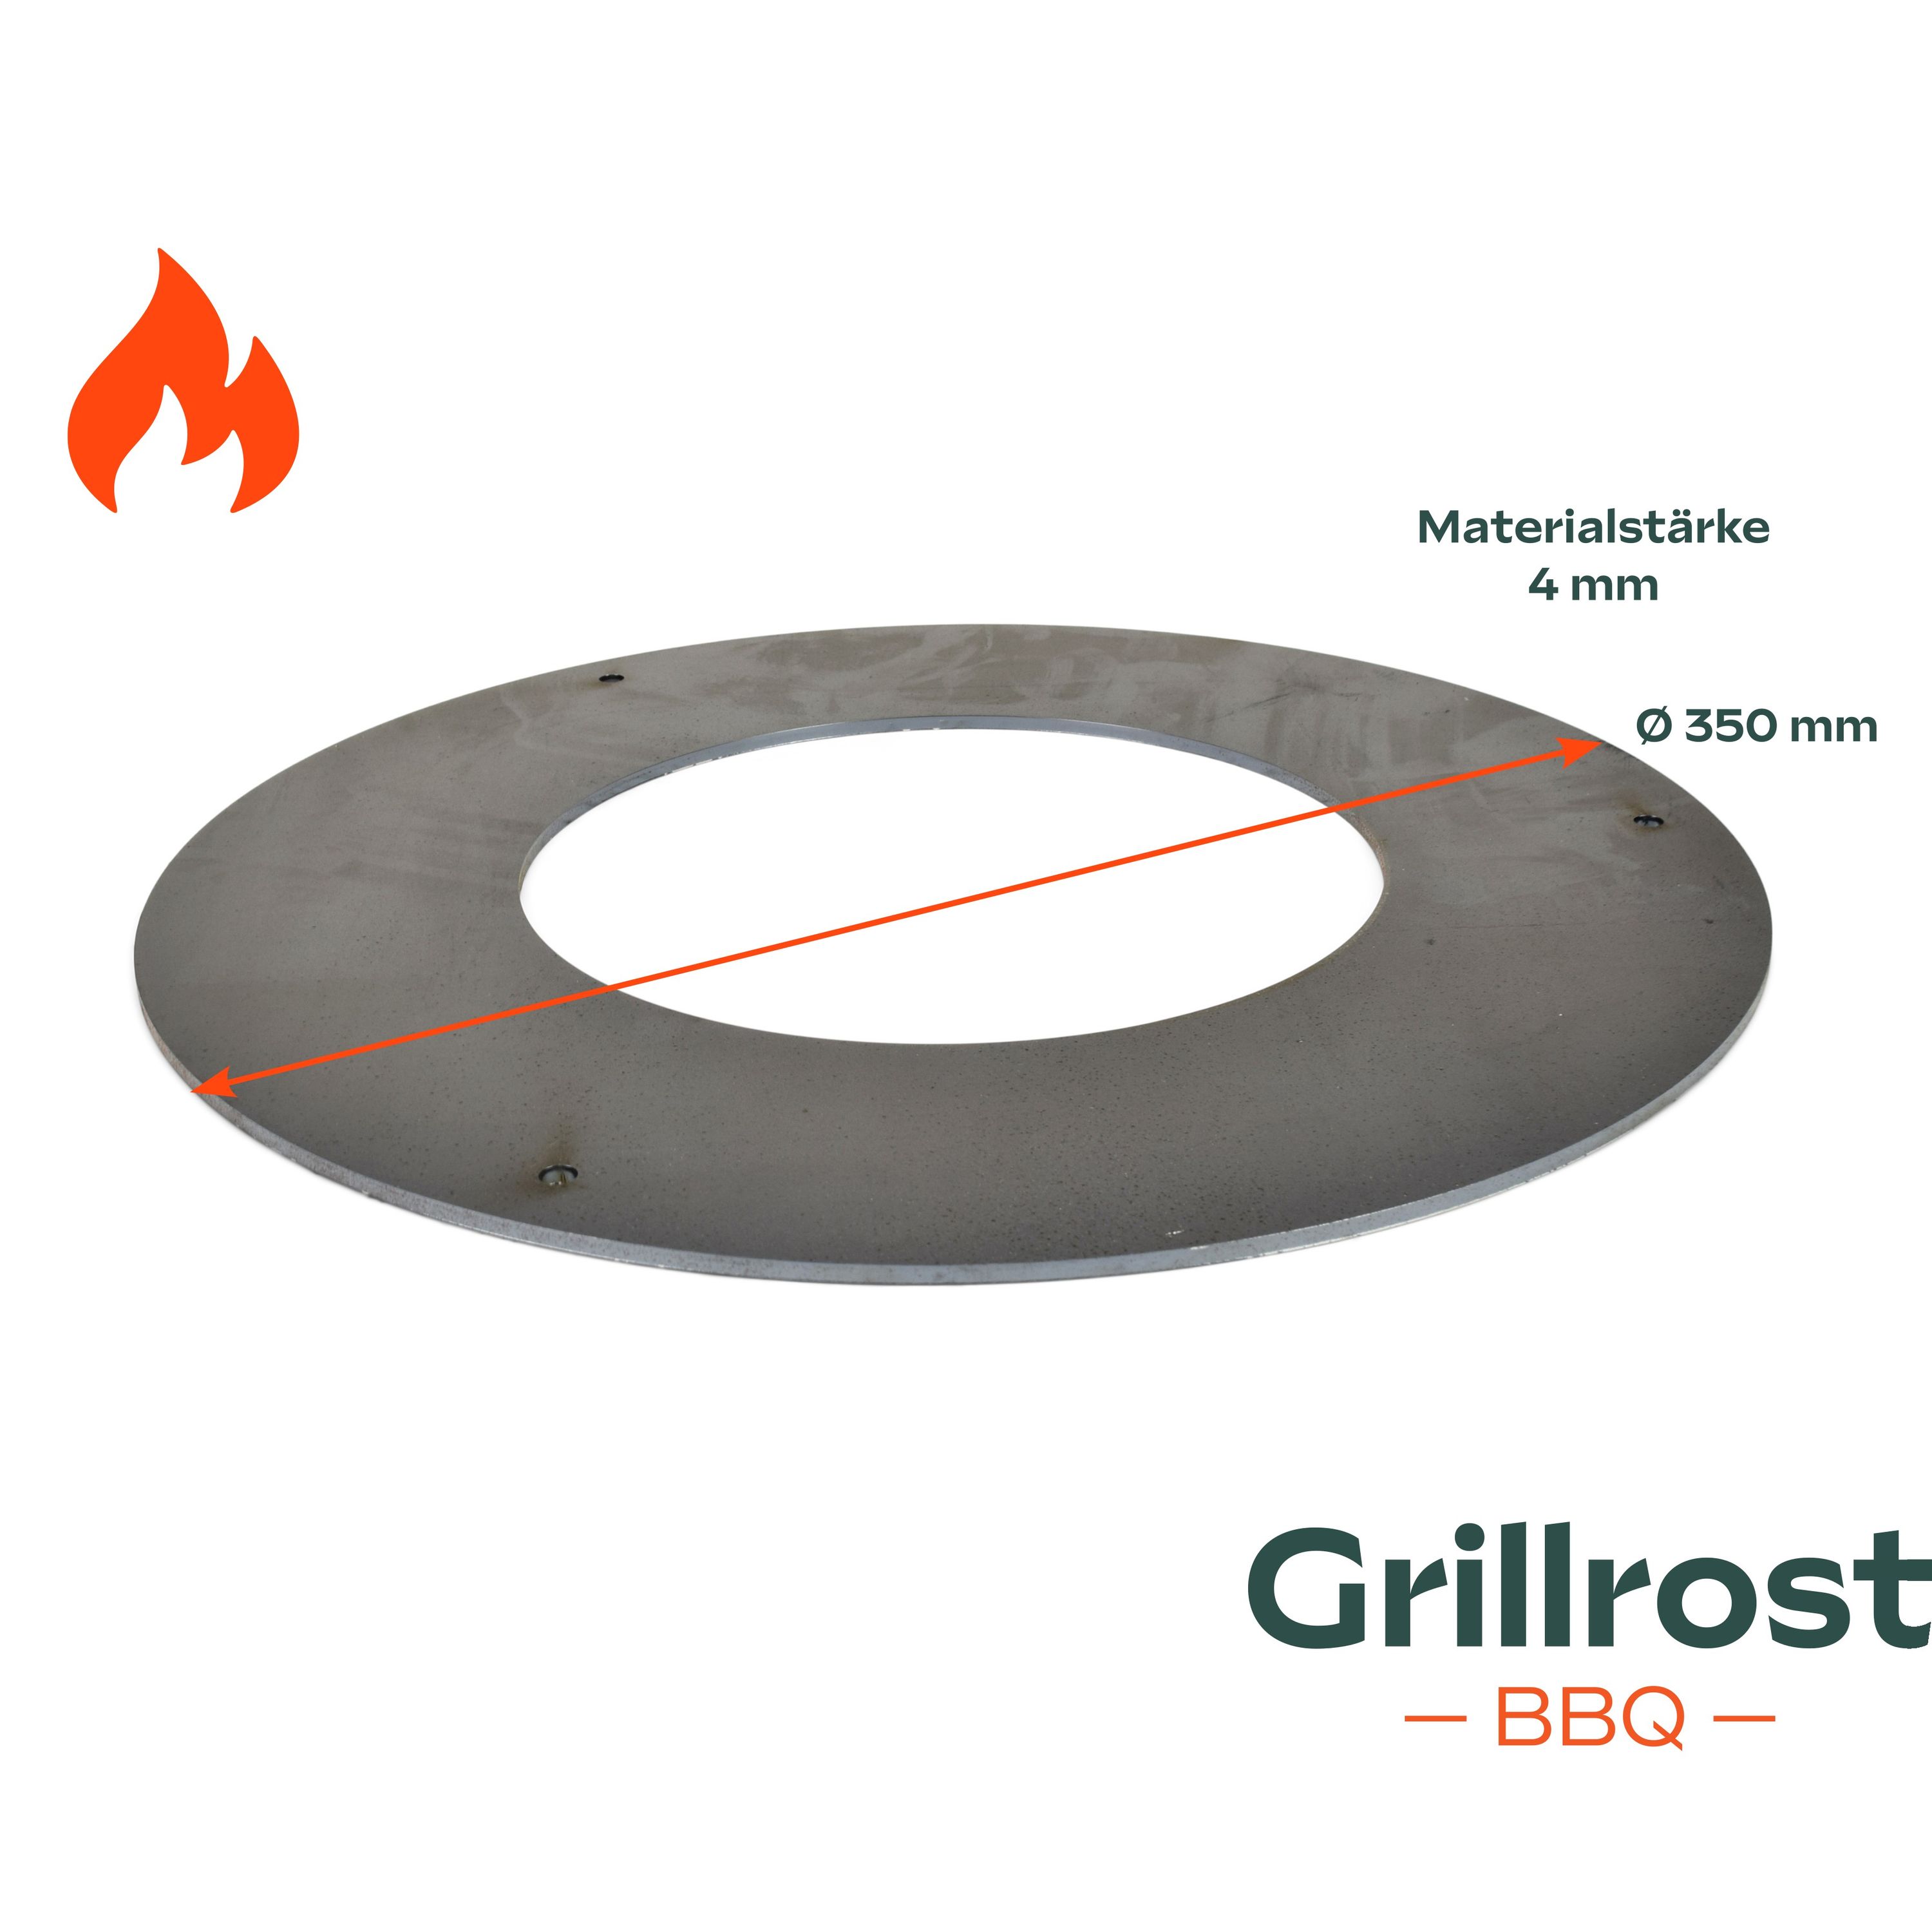 Adapter plate for the fire plate grill Fire plate reducing ring to 20 cm